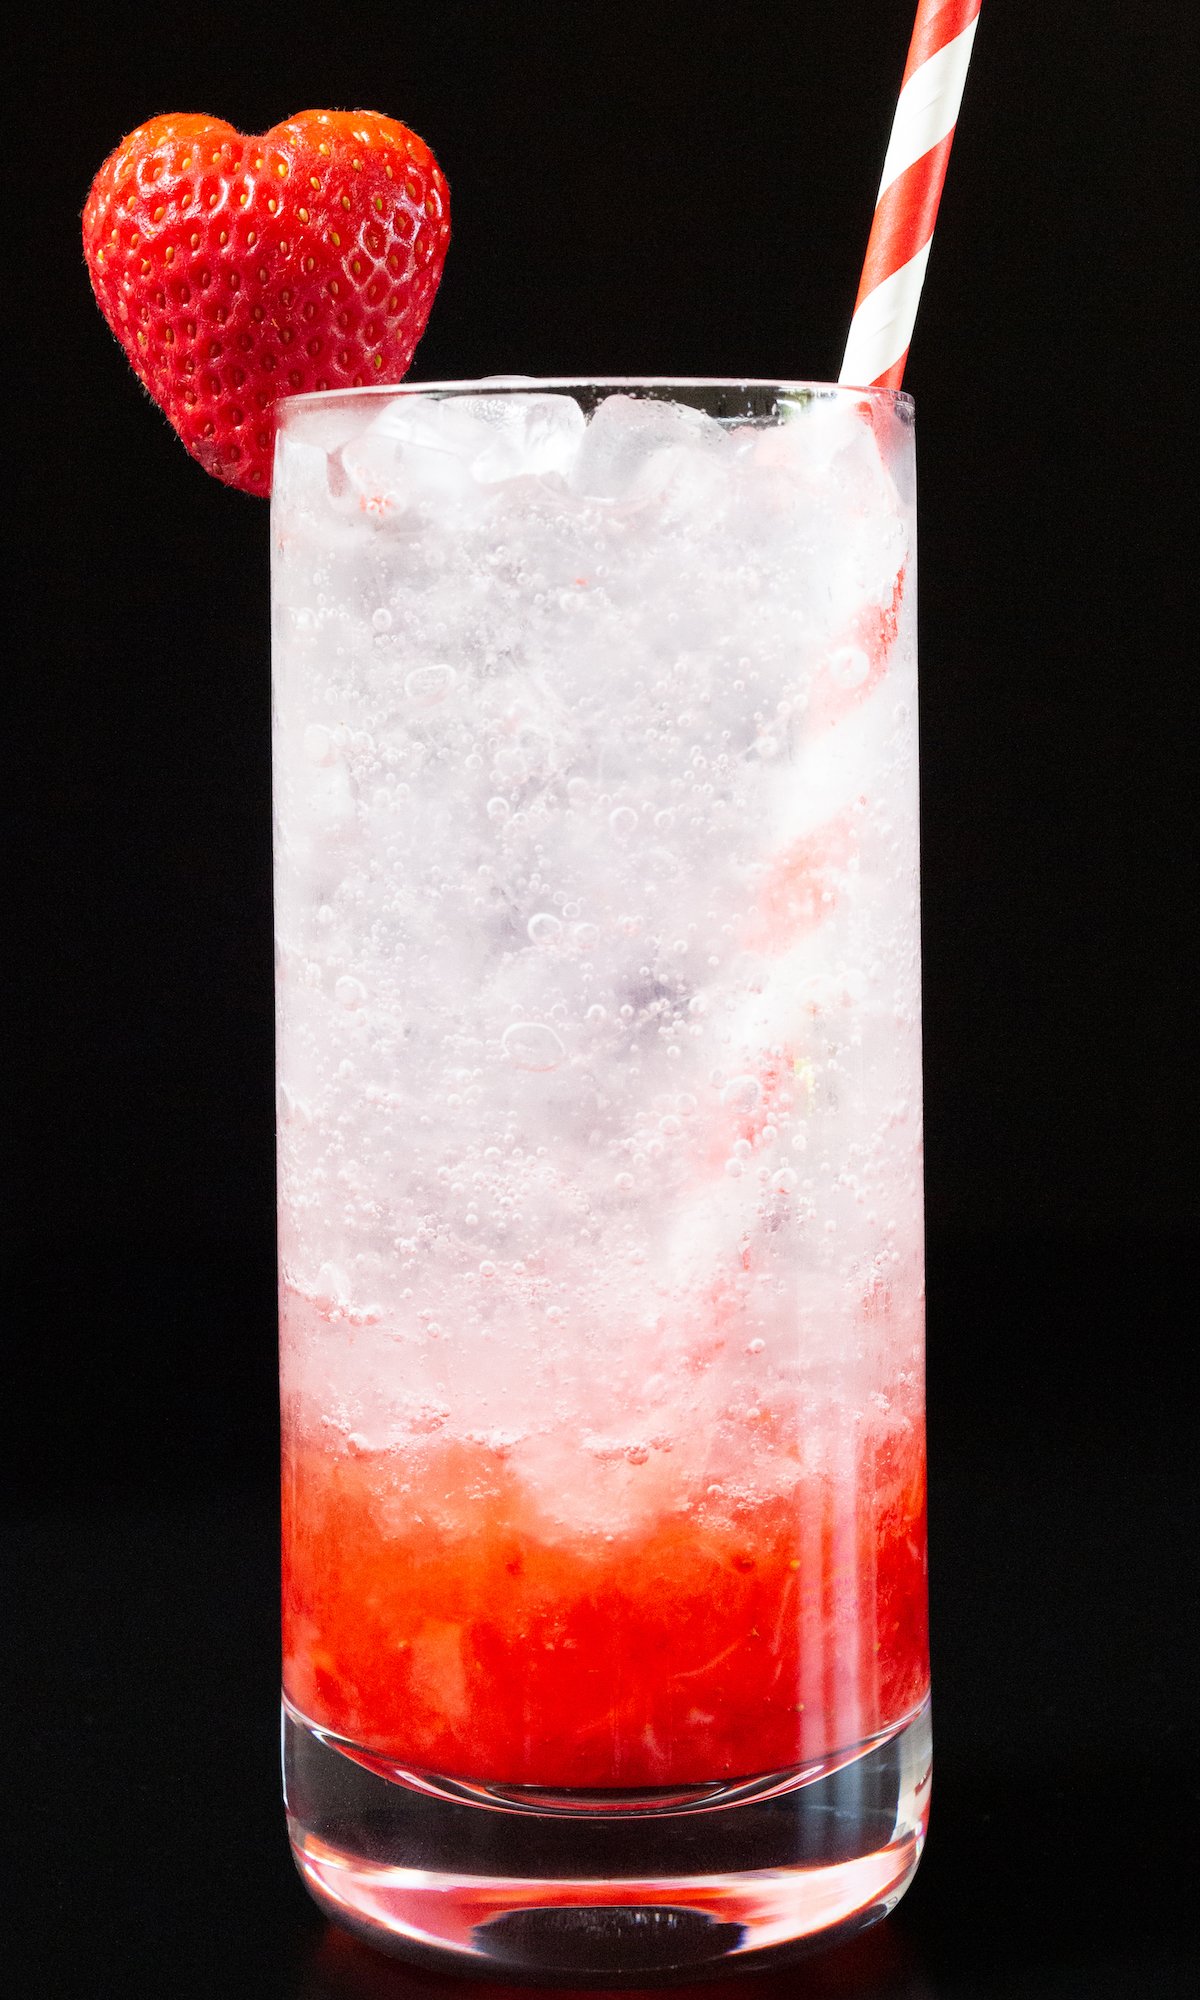 A highball glass is filled with a strawberry gin cocktail, which has red strawberry puree on the bottom and white club soda on top. Garnished with a heart shaped strawberry & red and white striped straw.